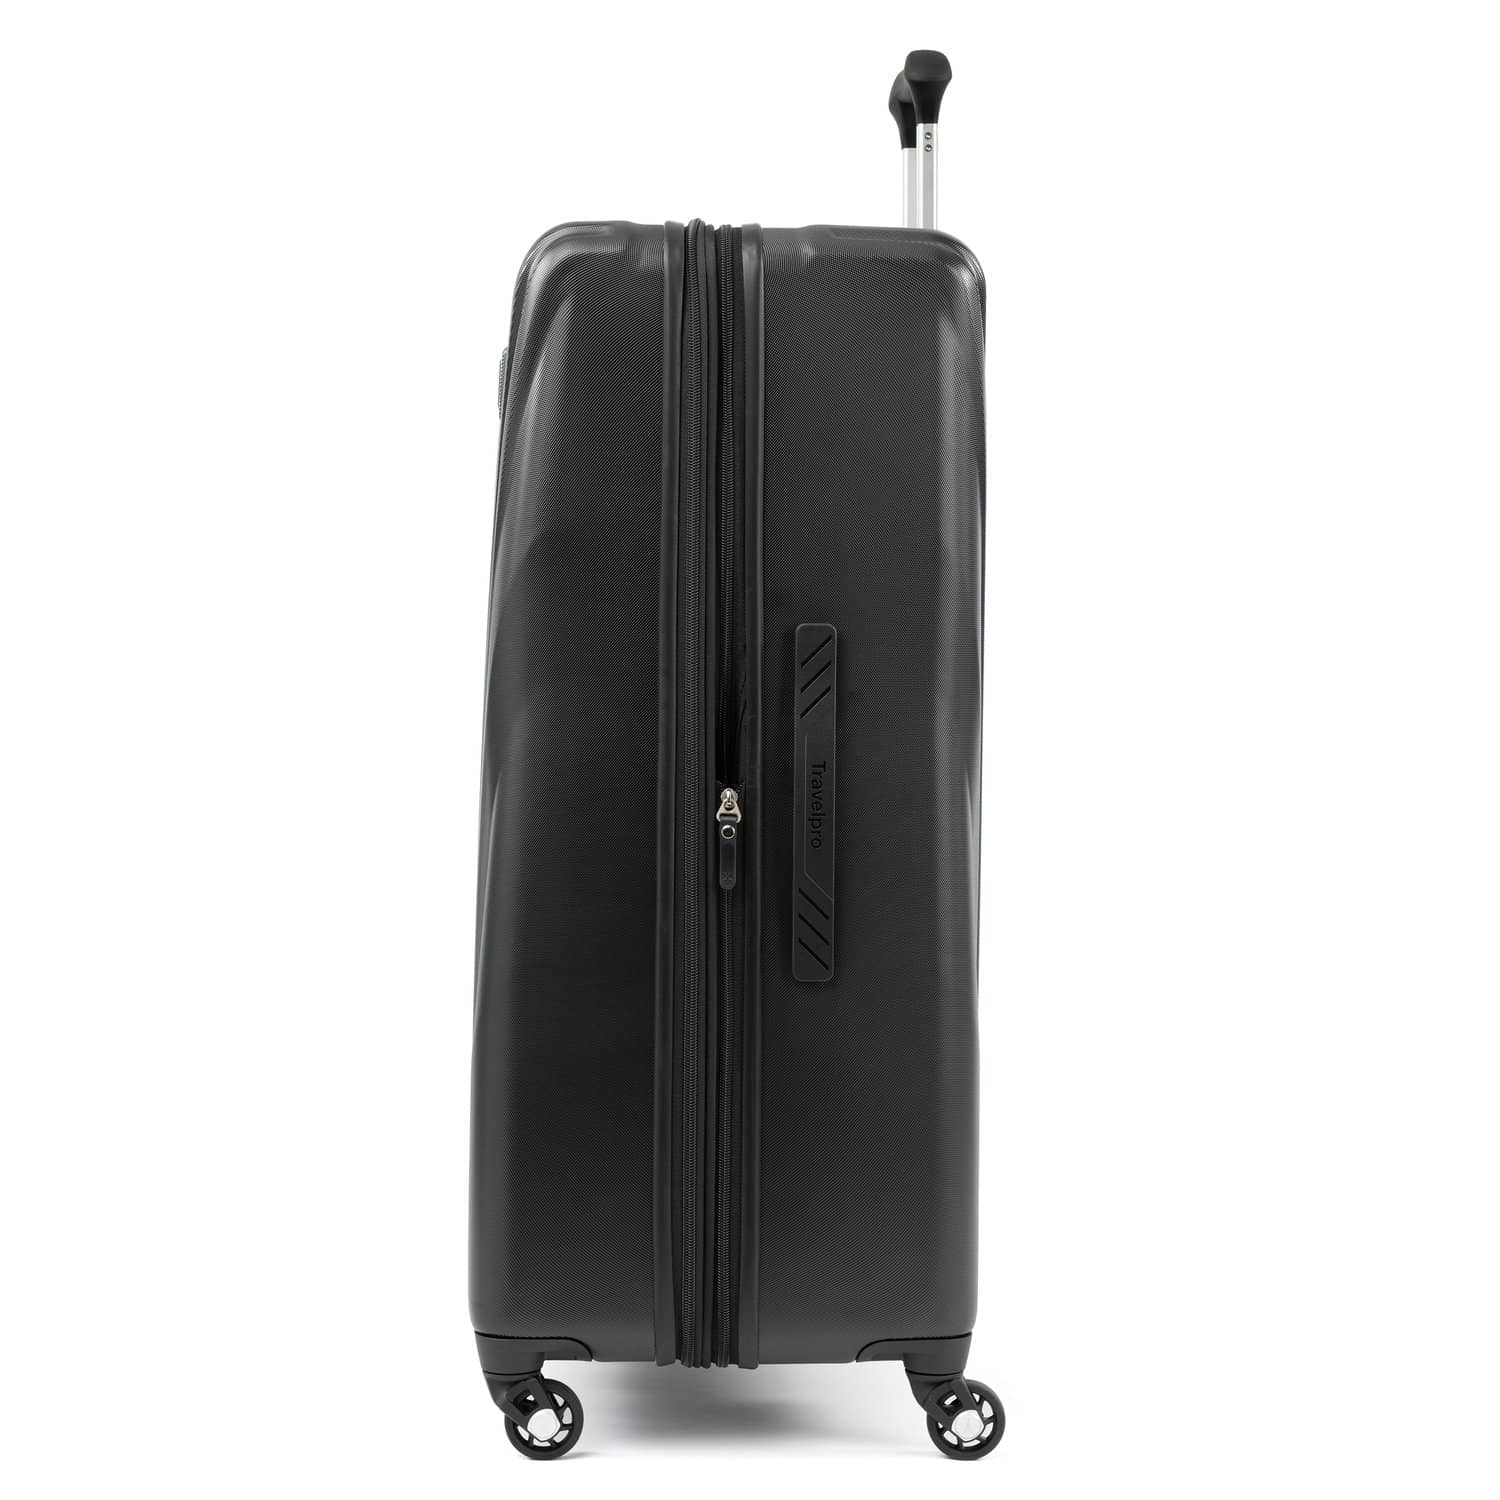 travelpro hardside luggage reviews